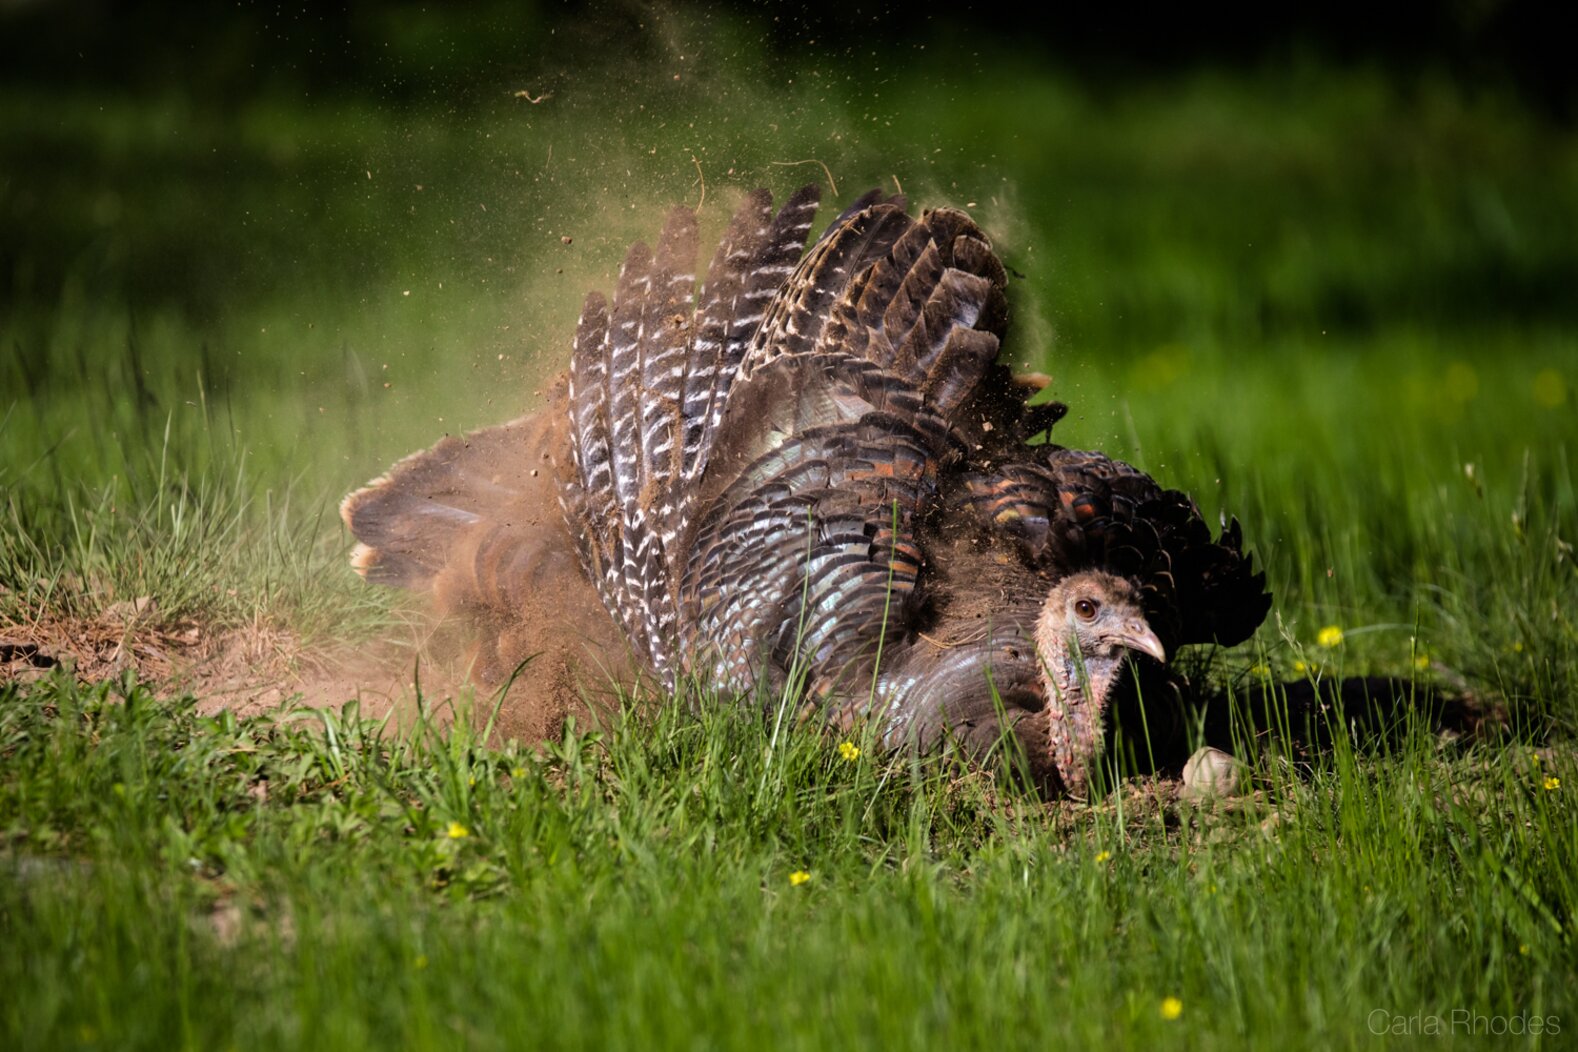 A Wild Turkey takes a “dust bath” (a practice thought to discourage insect parasites). Wild Turkeys breed in Pelham Bay Park. Photo: Carla Rhodes